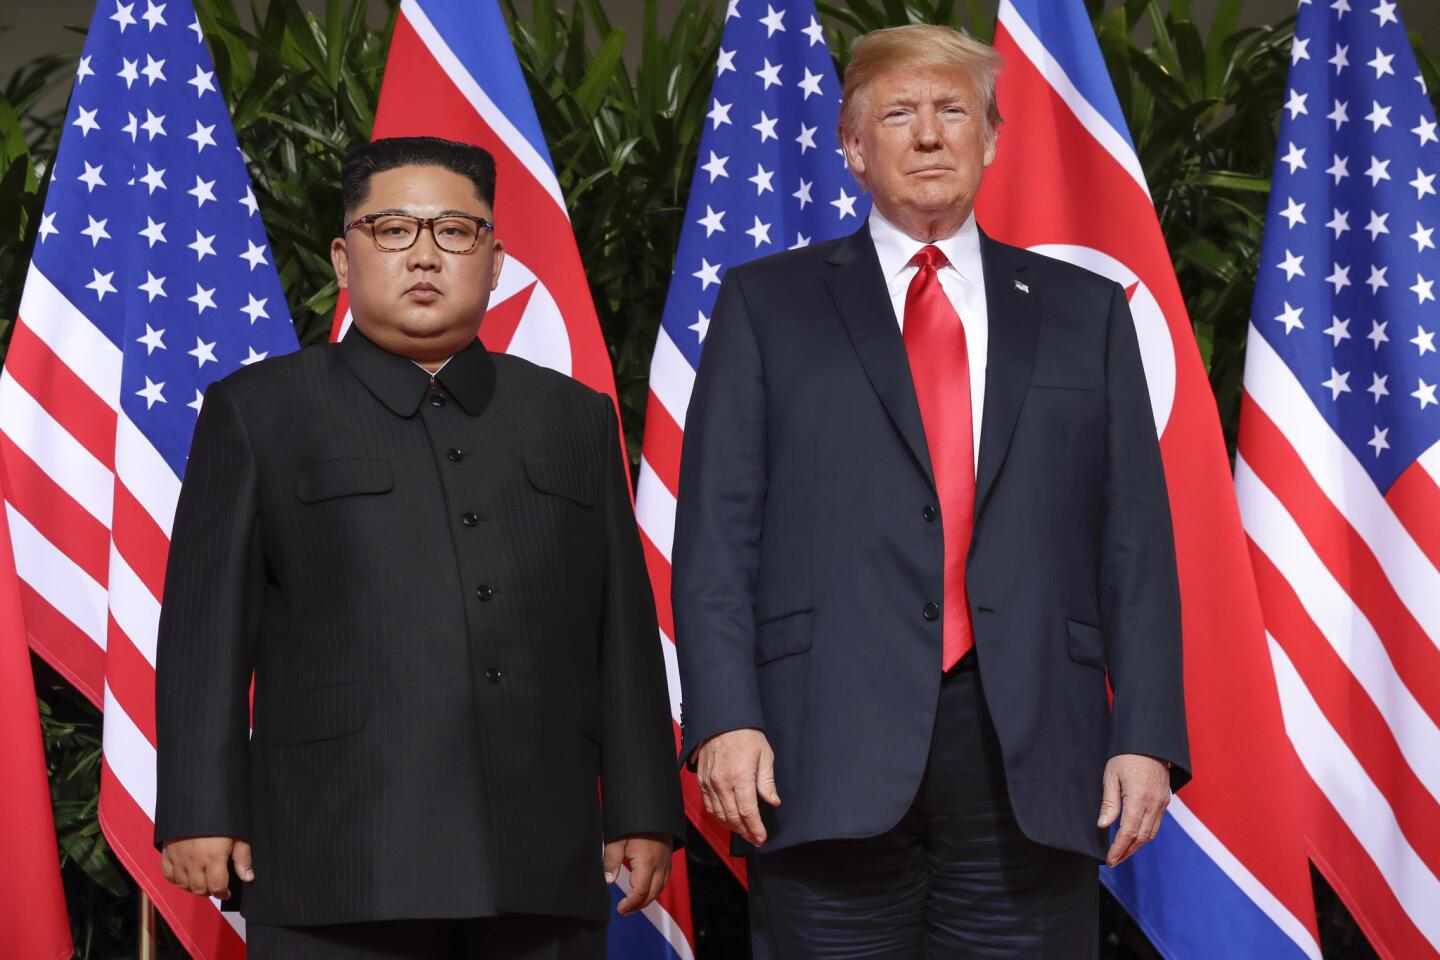 U. S. President Donald Trump stands with North Korea leader Kim Jong Un for a photograph at the Capella resort on Sentosa Island on June 12, 2018, in Singapore.